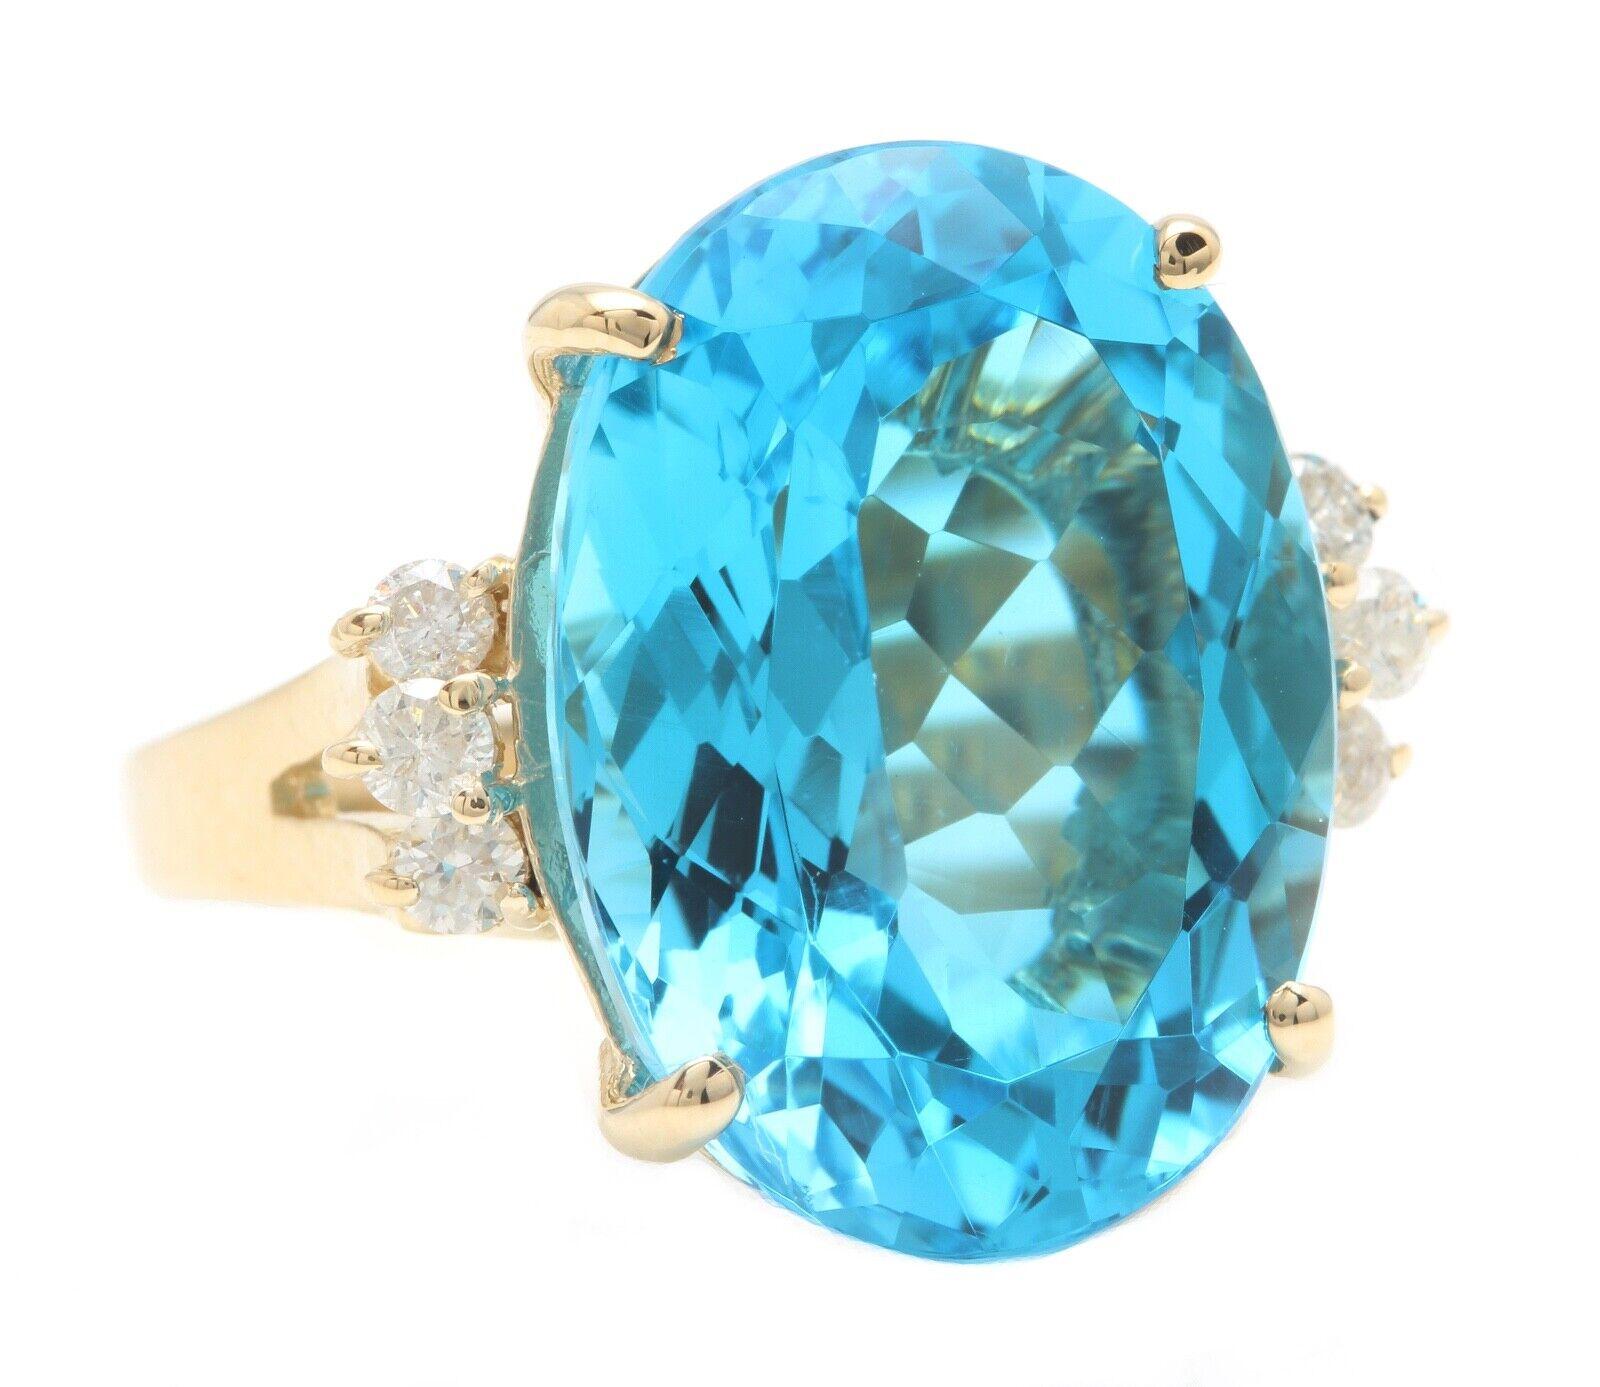 25.25 Carats Impressive Natural Swiss Blue Topaz and Diamond 14K Solid Yellow Gold Ring

Suggested Replacement Value: Approx. $5,500.00

Total Topaz Weight is: Approx. 25.00 Carats

Topaz Treatment: Heating

Topaz Measures: Approx. 22.00 x